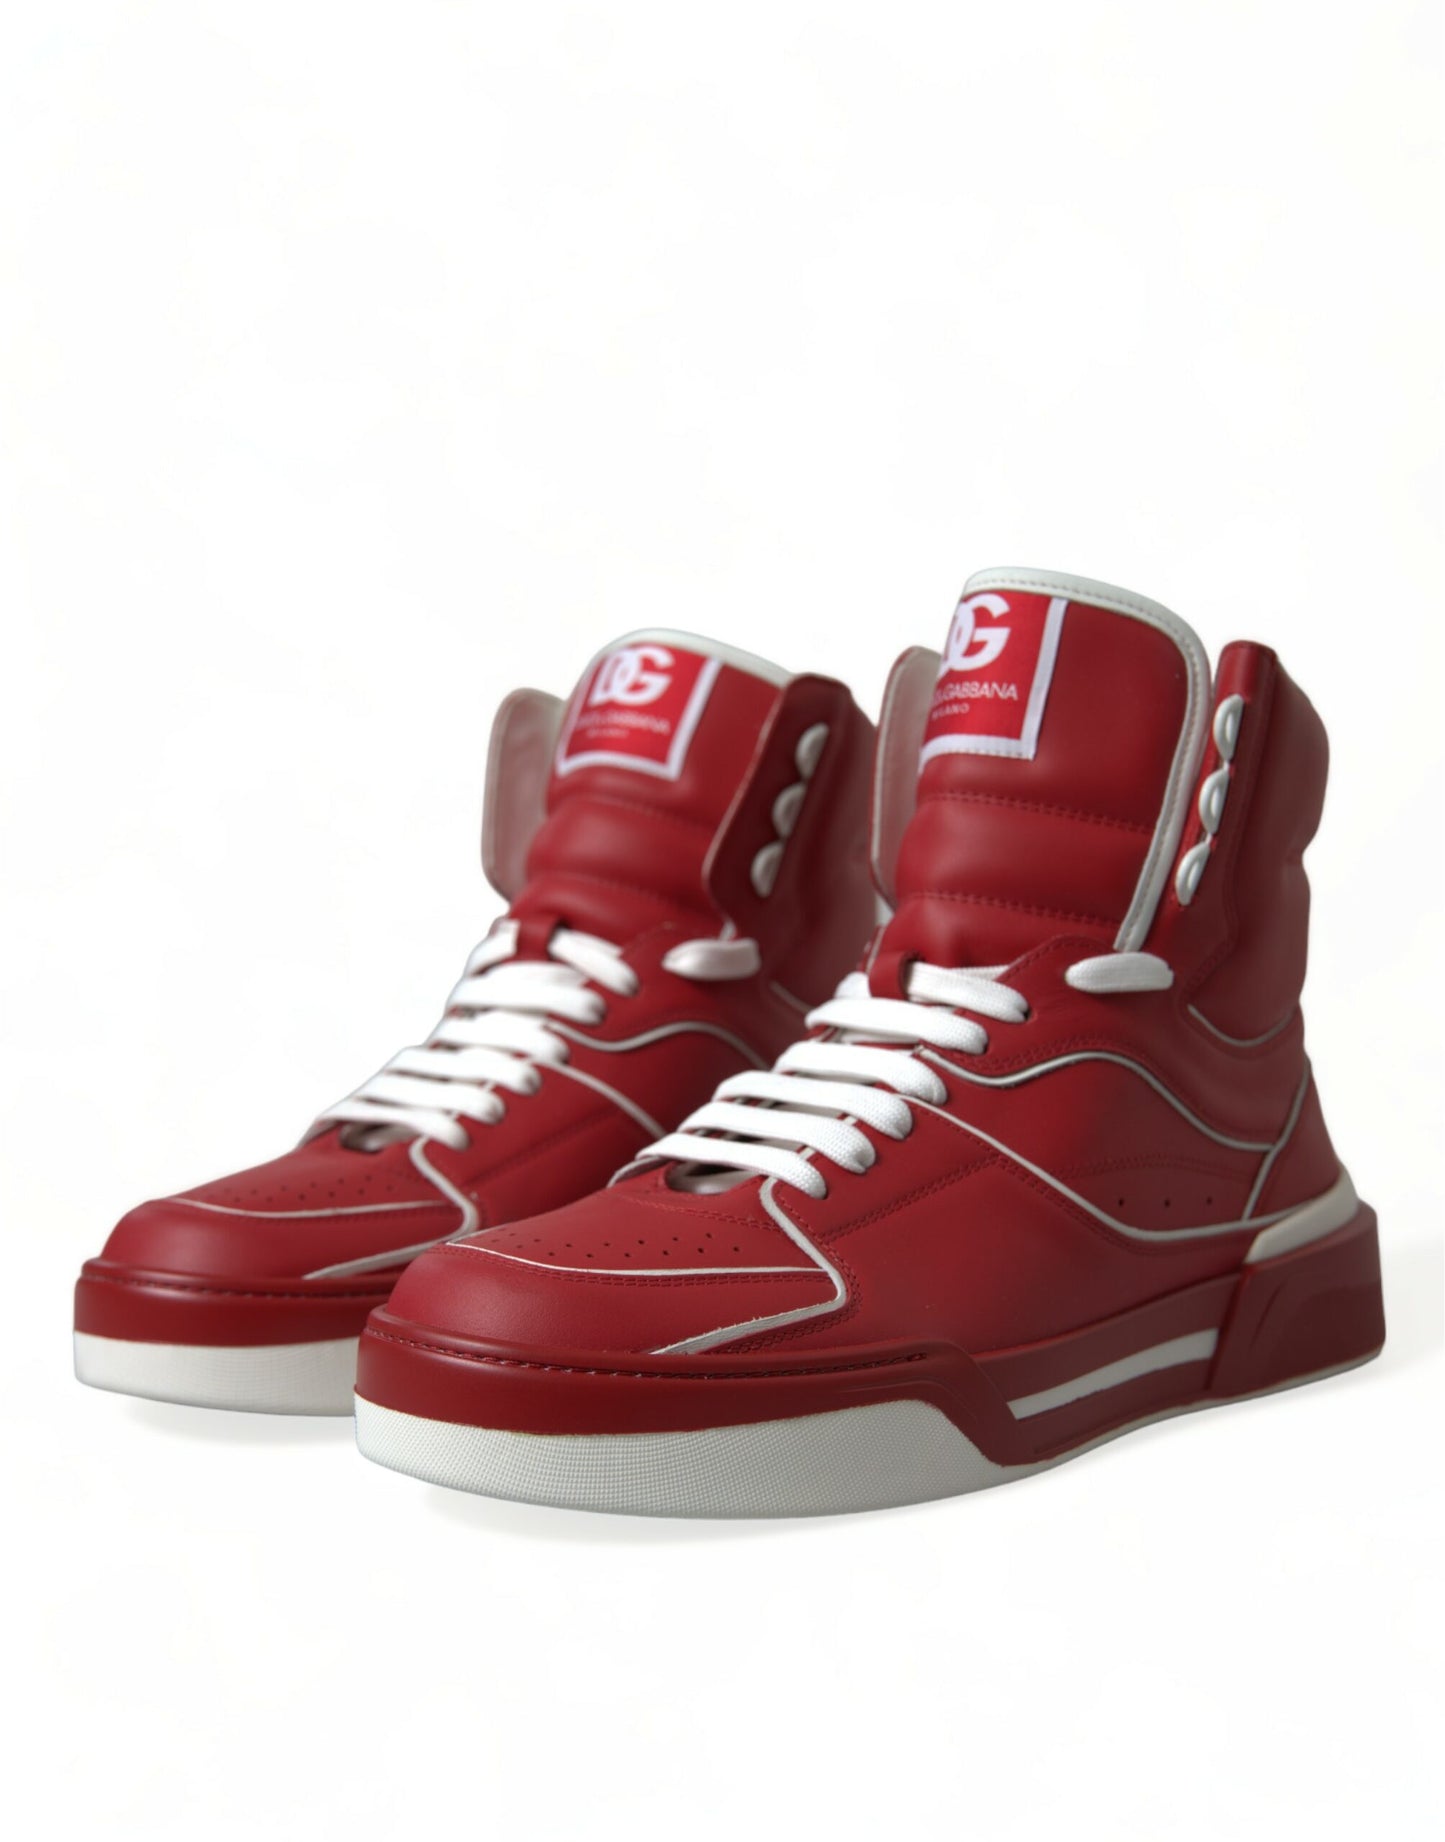 Sleek High-Top Leather Sneakers - Red & White